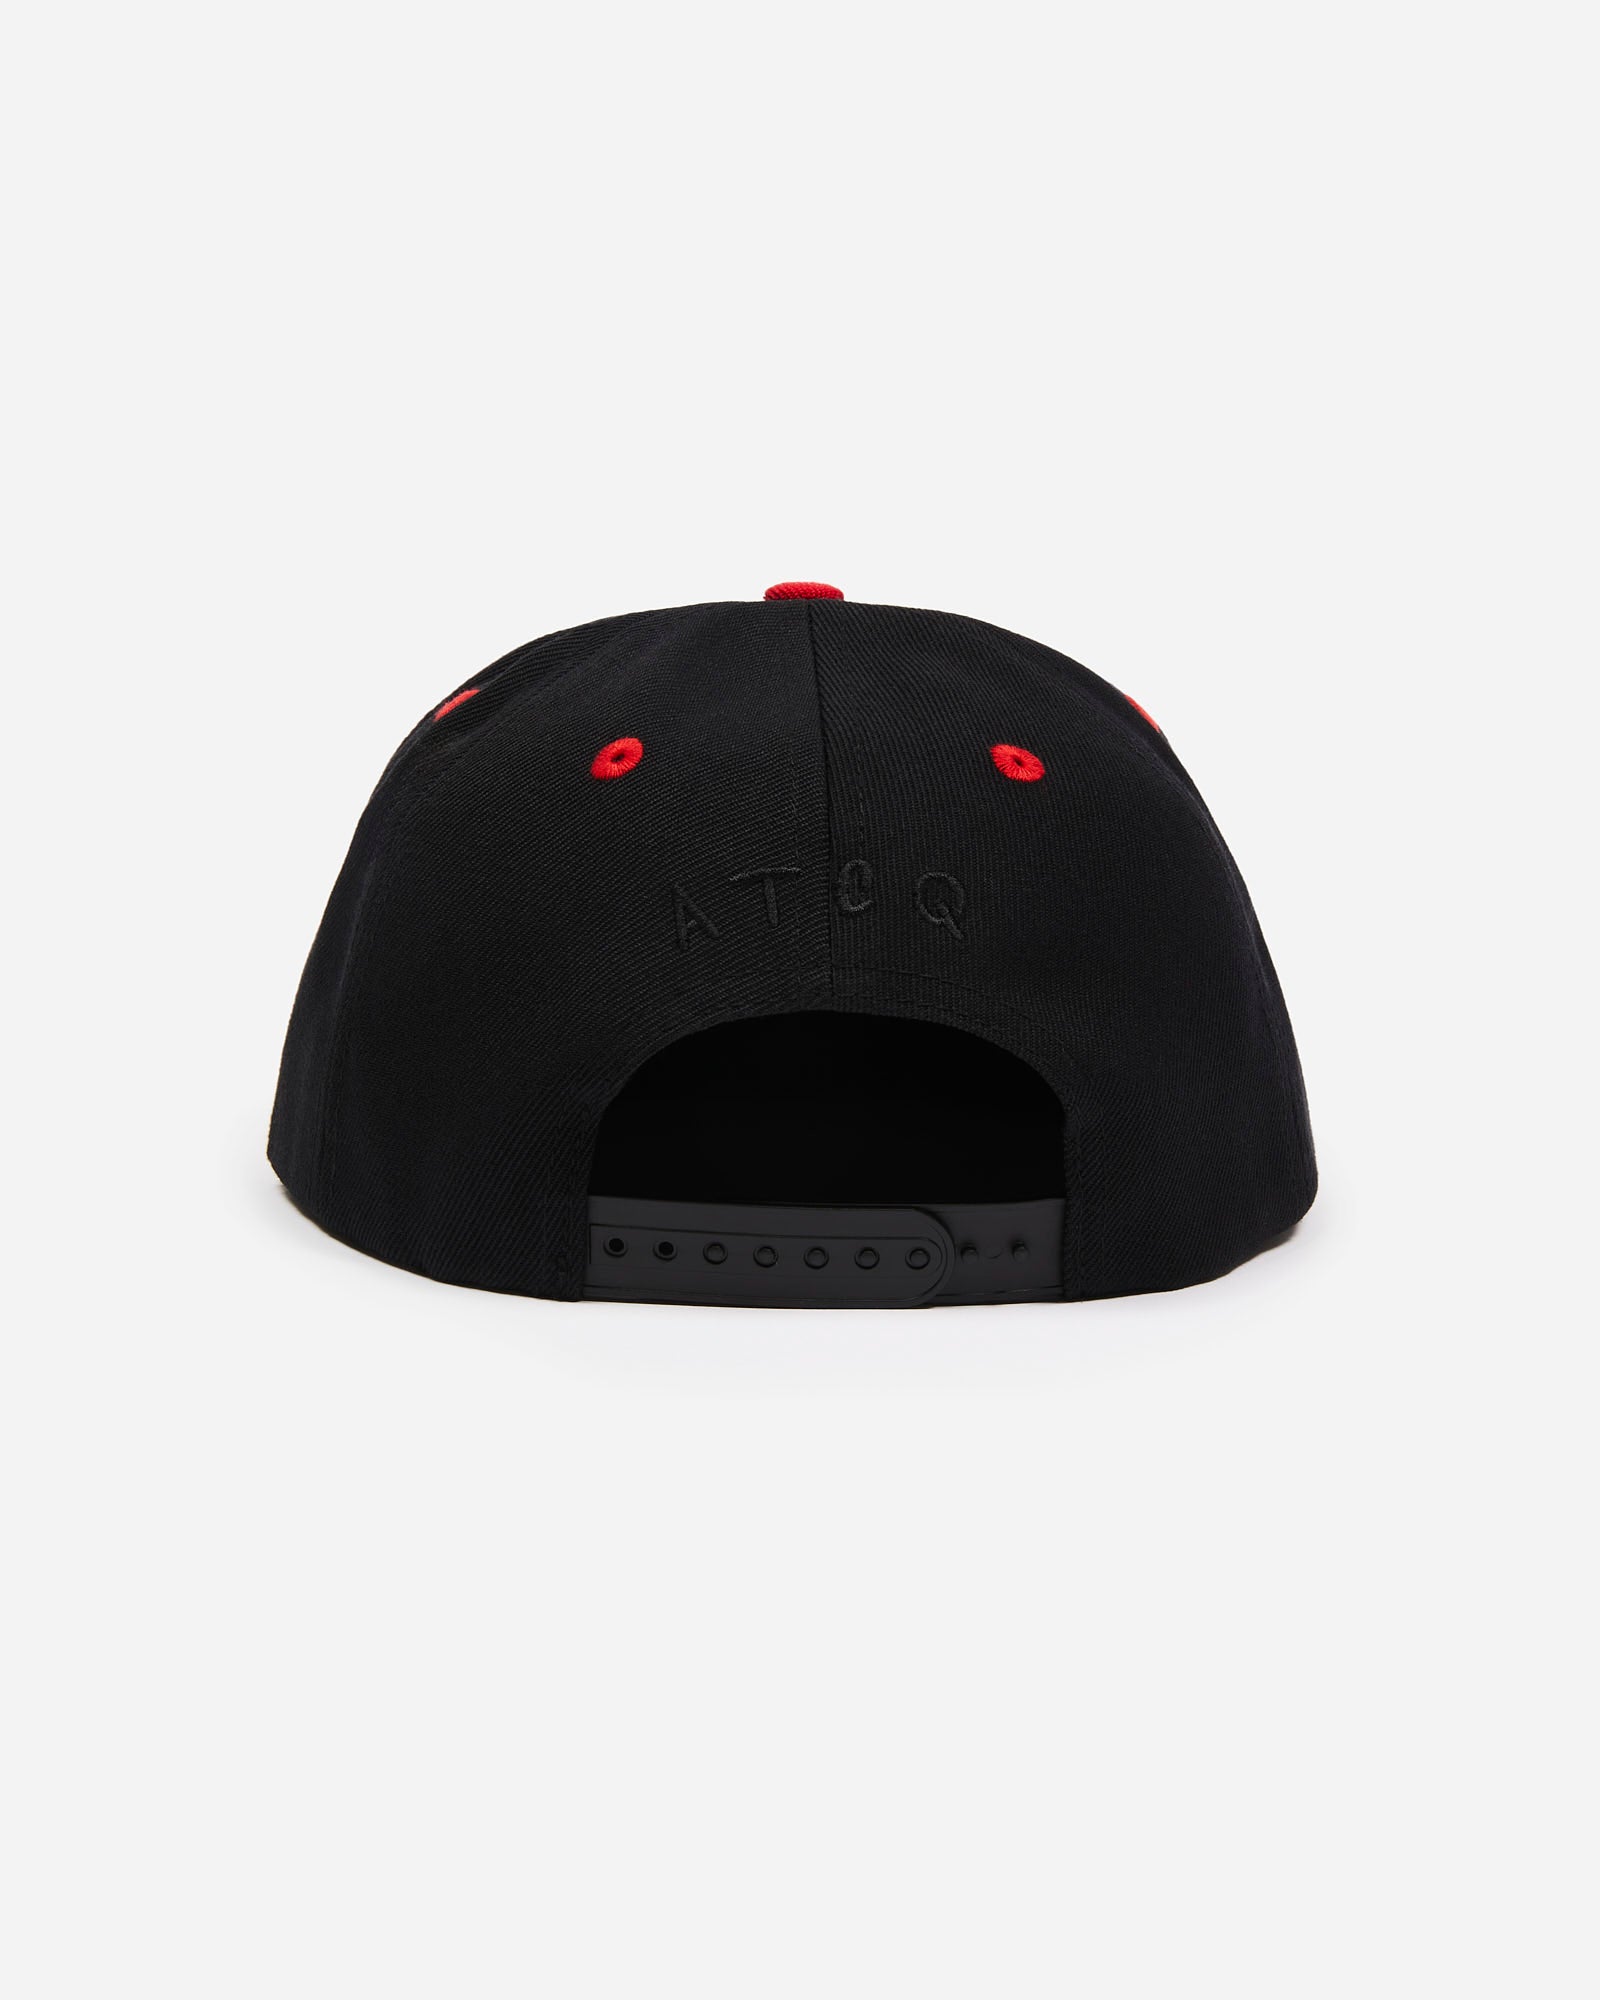 ATCQ Two Tone Snapback Red Hat